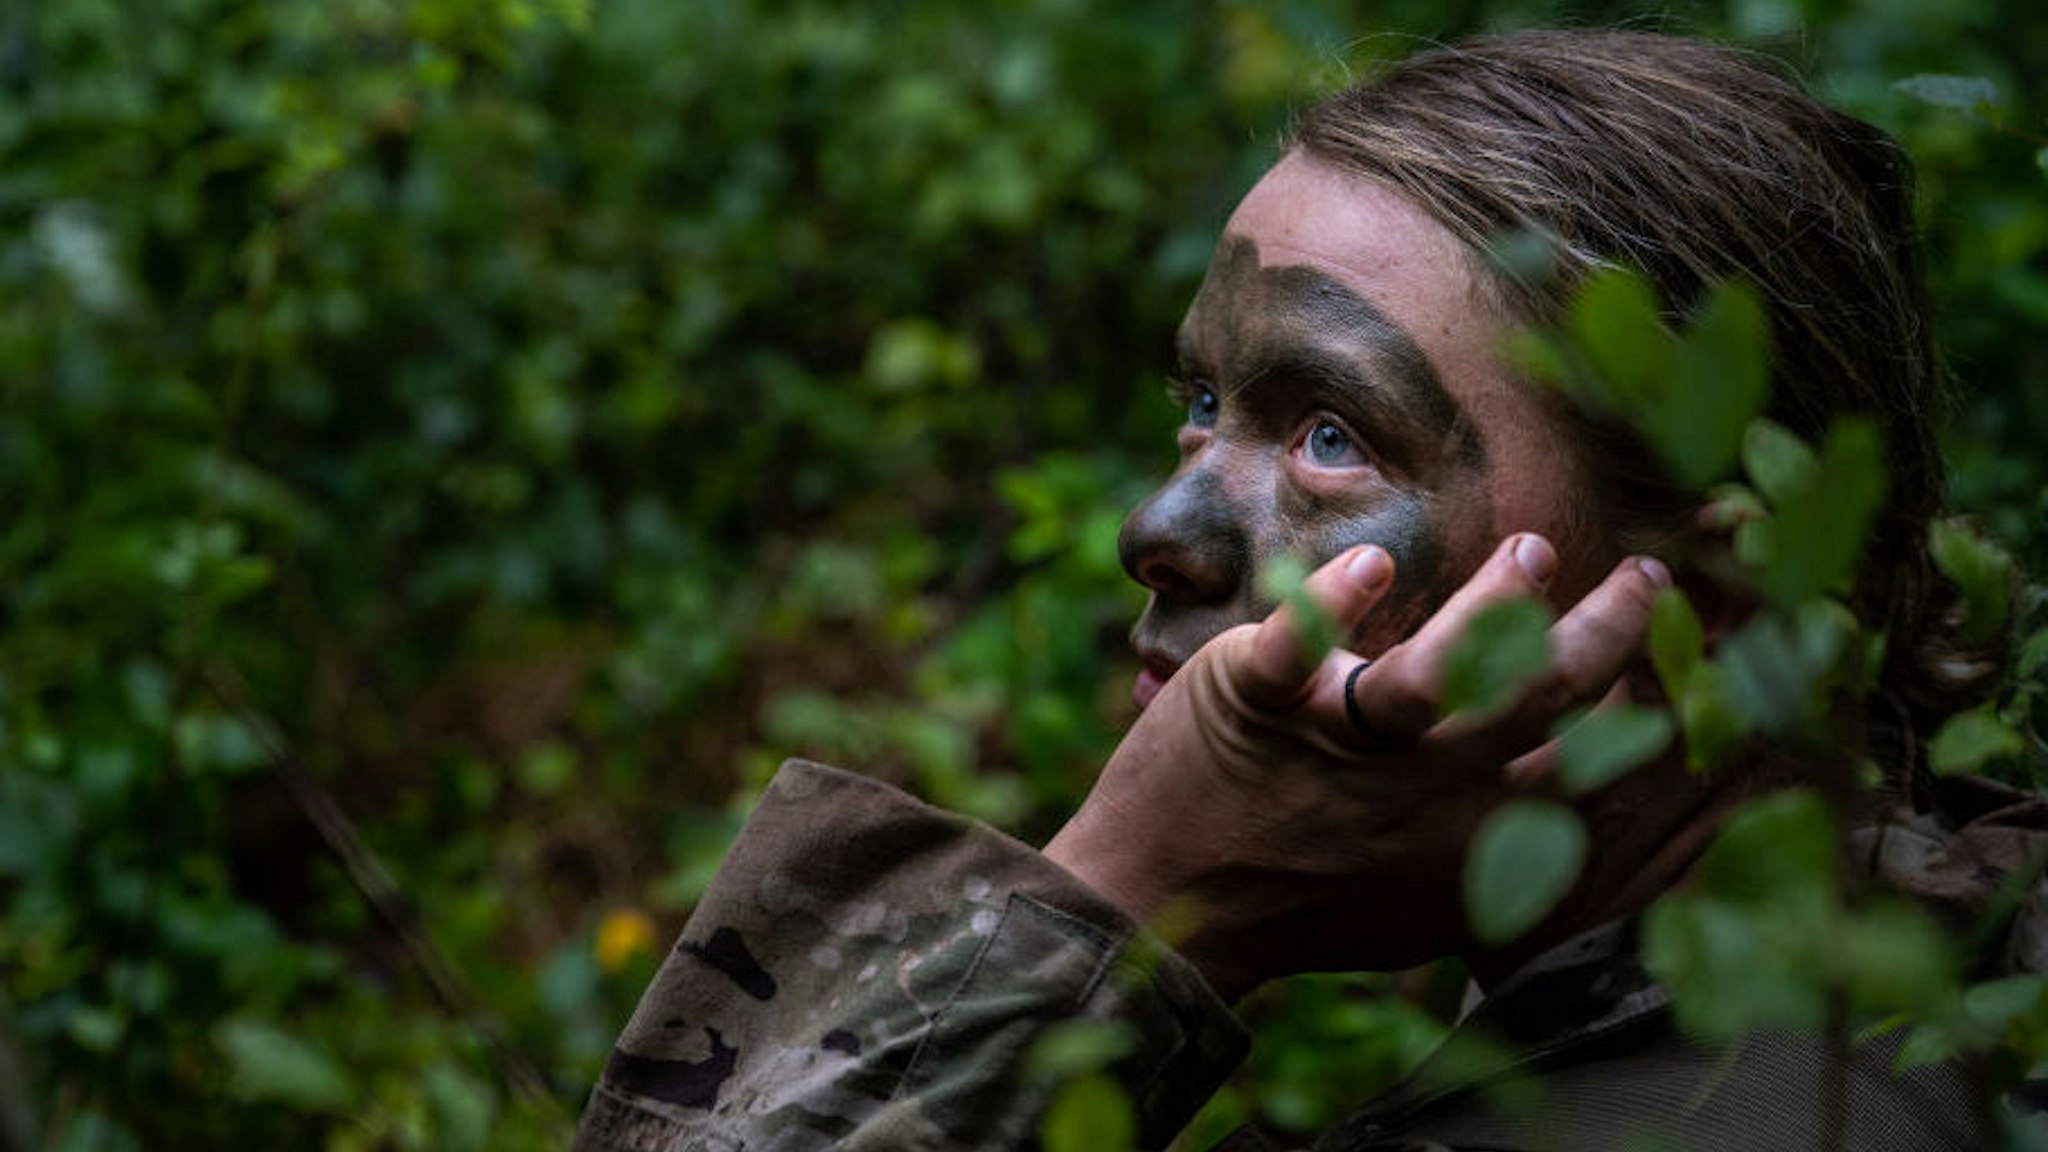 A cadet of the 3rd Regiment listens to a nearby speaking cadet in Training Area 9 during Army ROTC Cadet Summer Training on July 1, 2021 in Fort Knox, Kentucky.